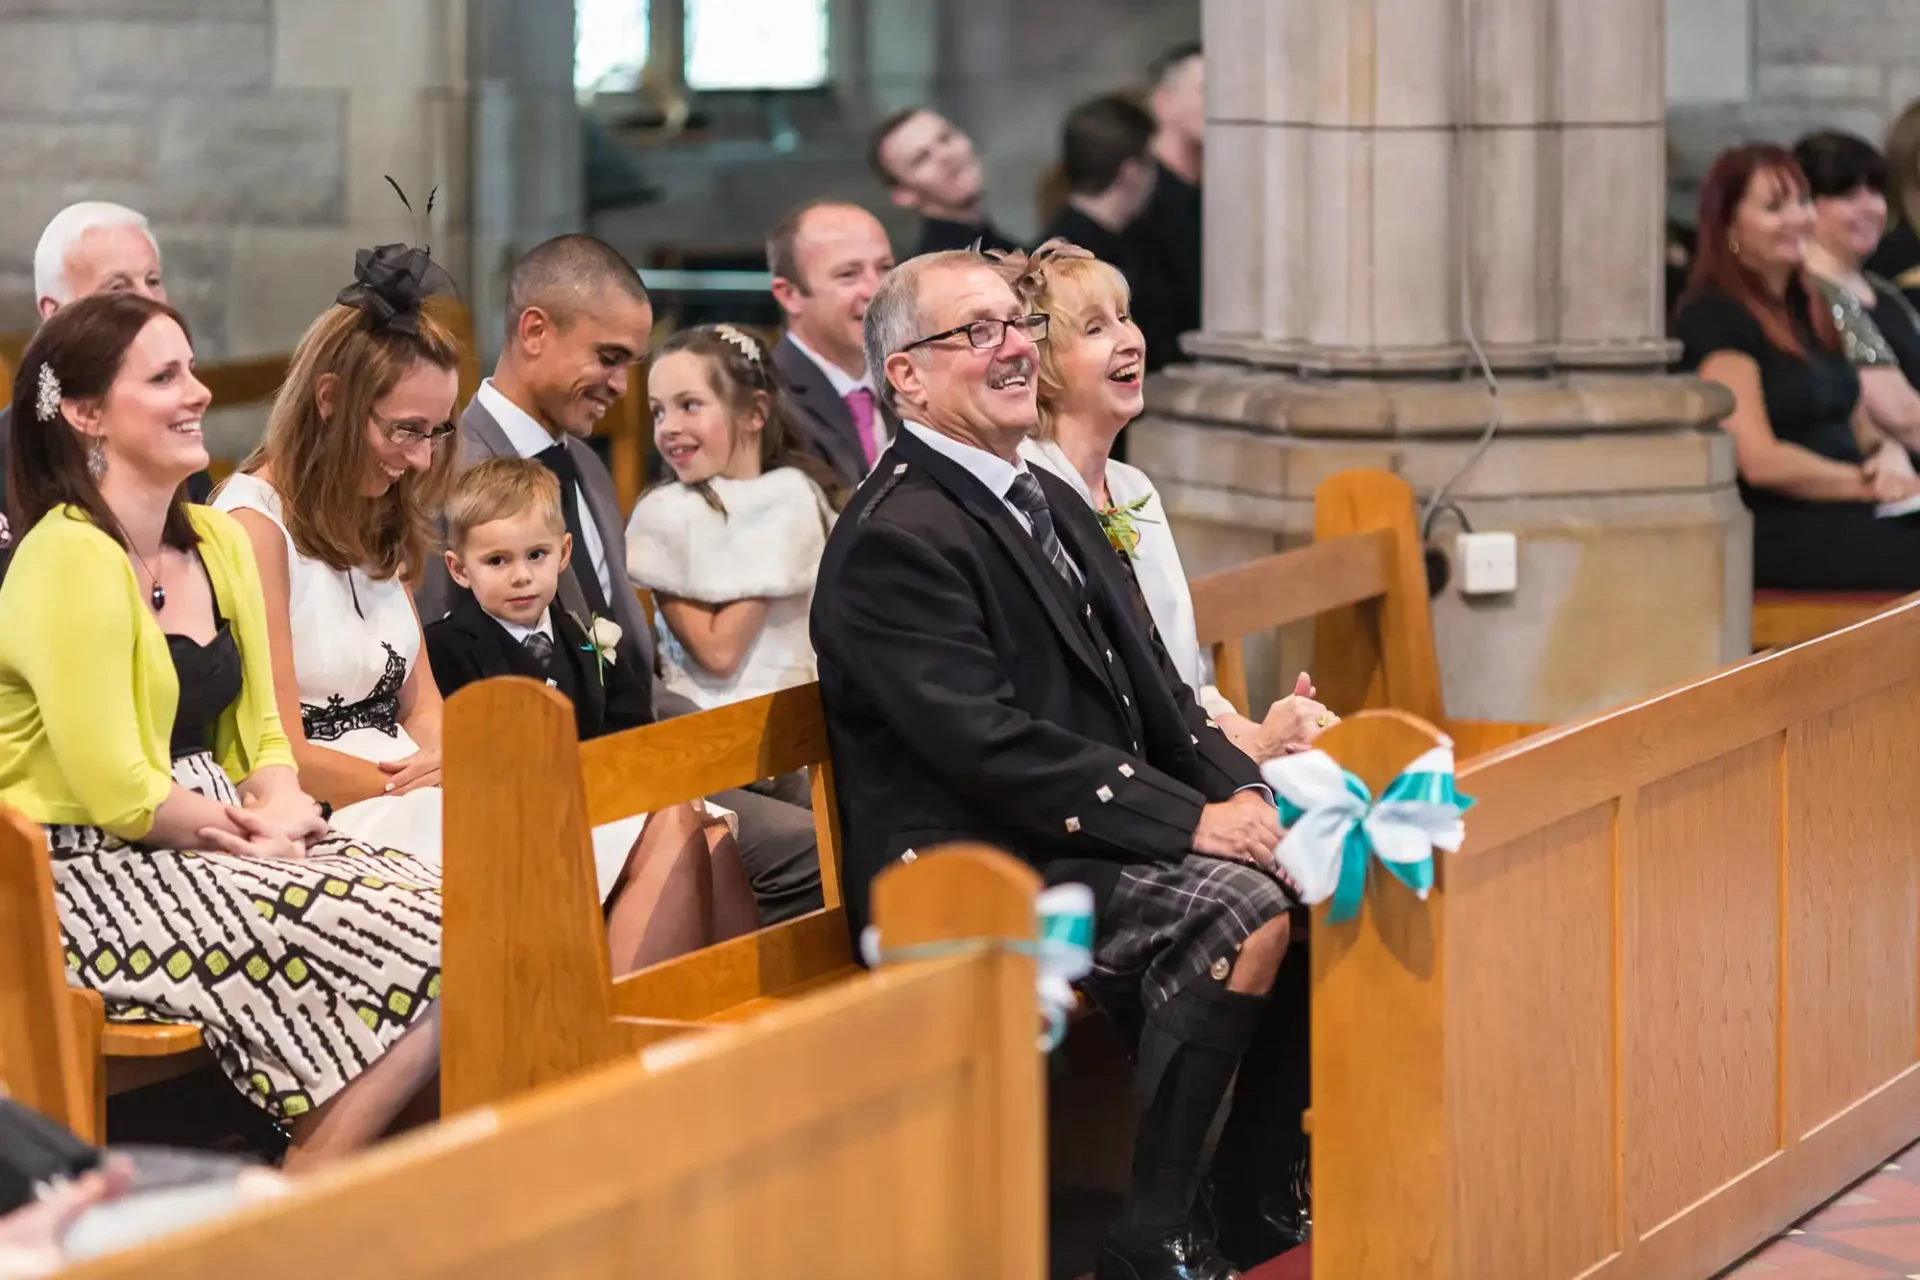 Guests in formal attire smiling and watching an event inside a church, including a man in a kilt and a woman with a corsage.